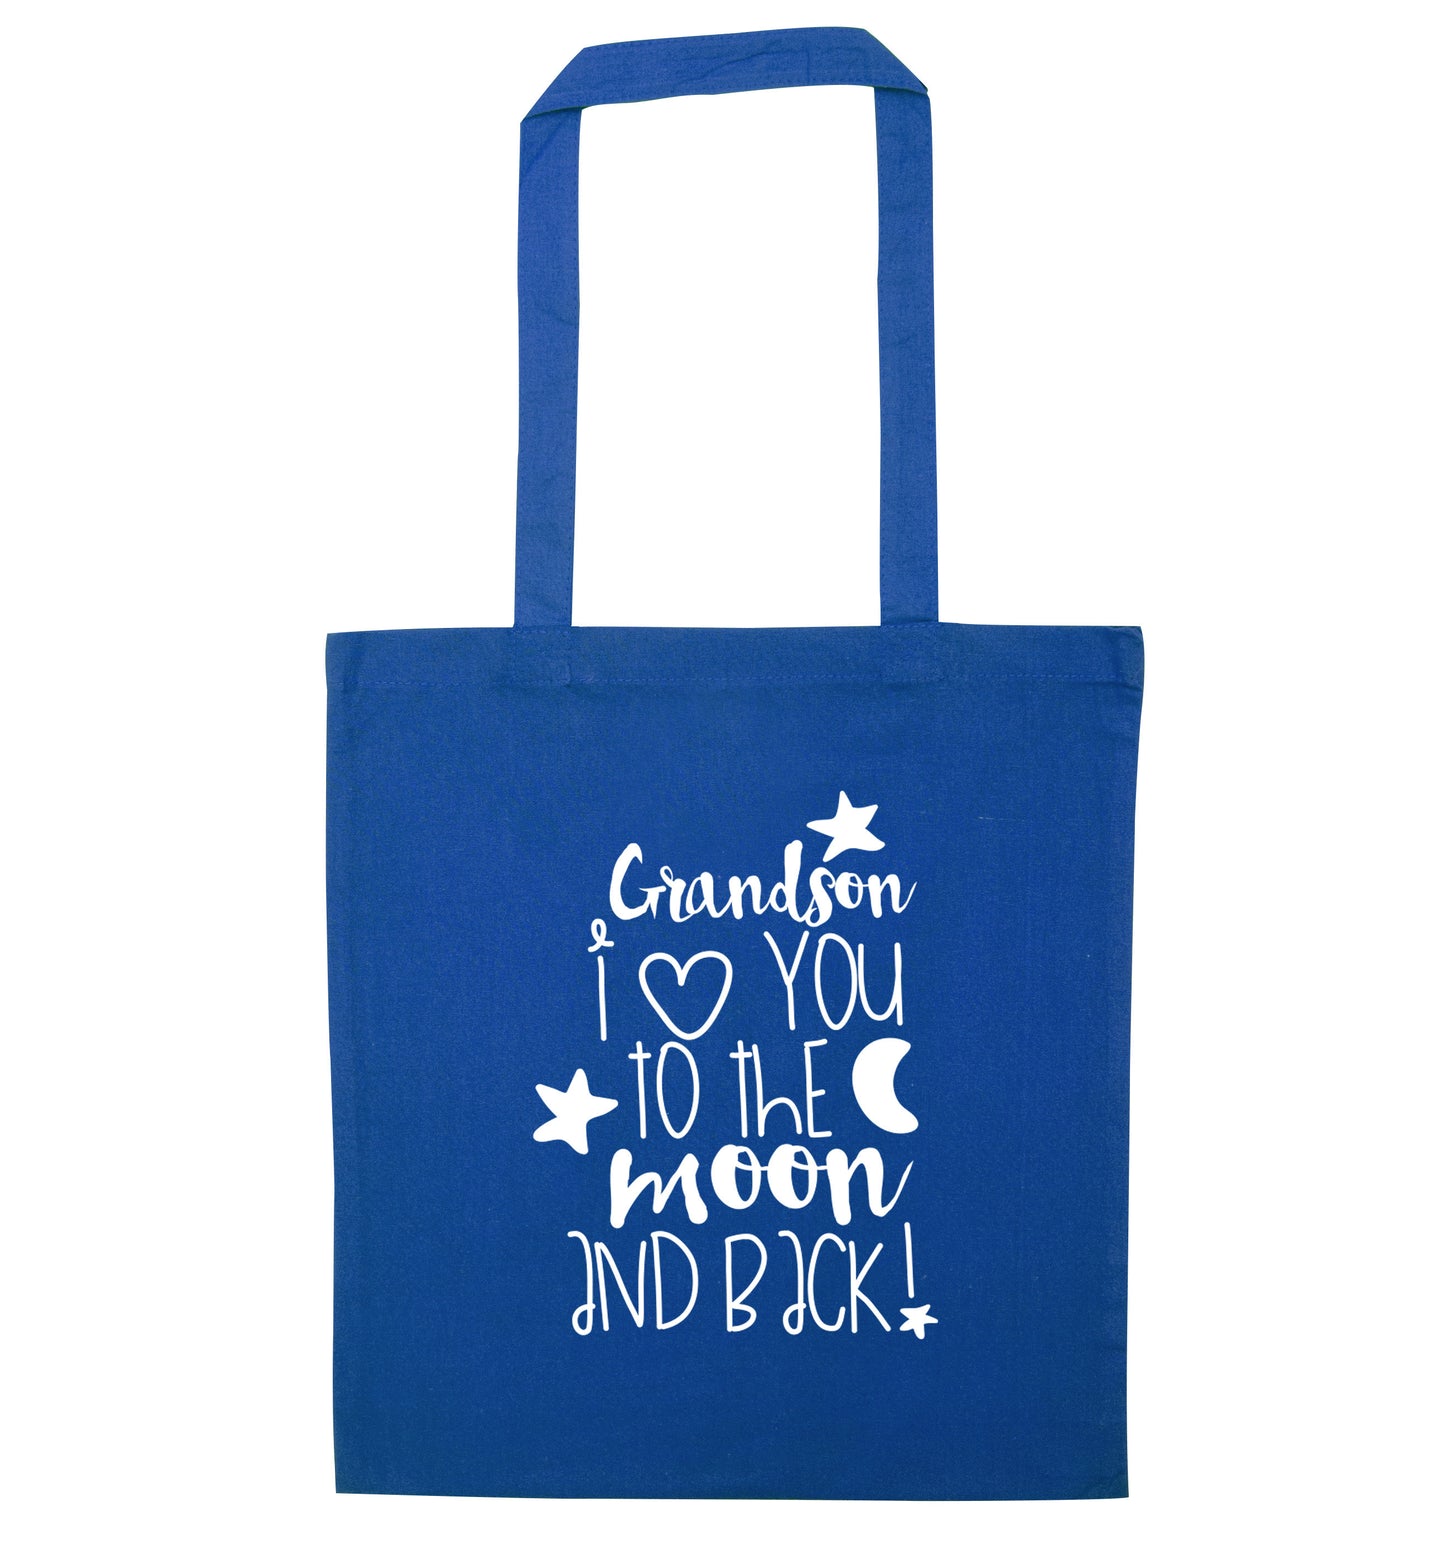 Grandson I love you to the moon and back blue tote bag